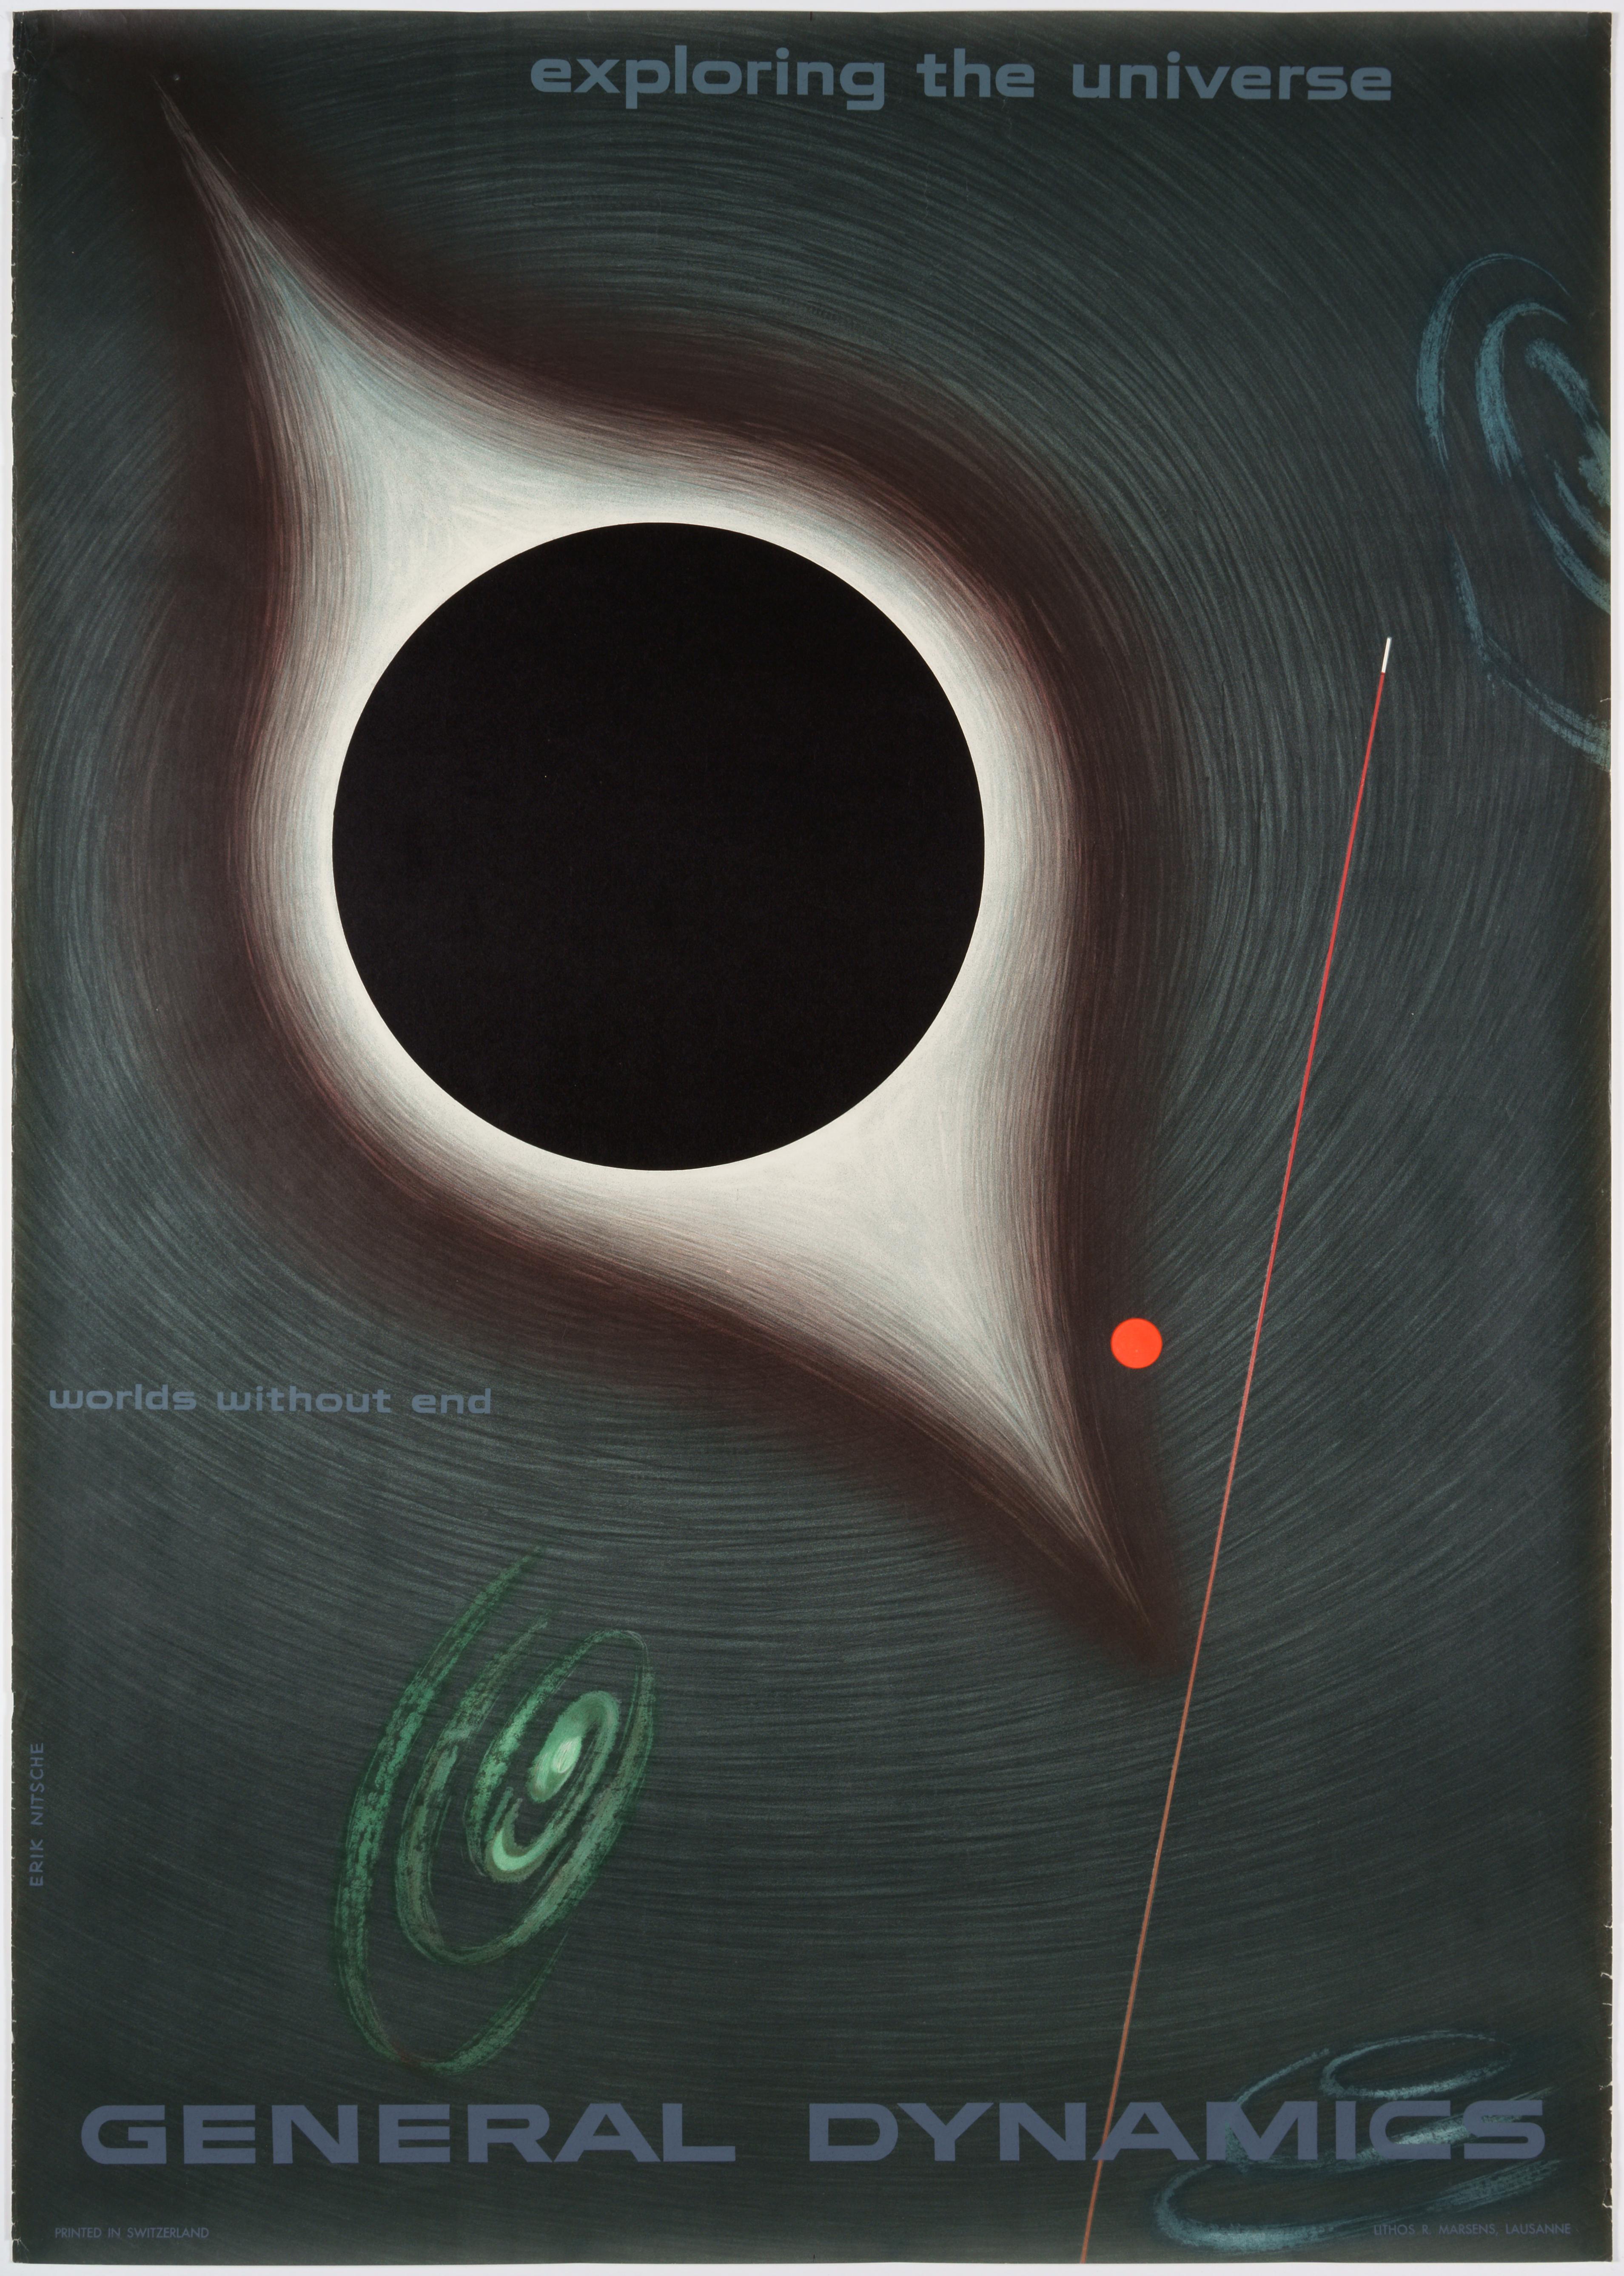 Erik Nitsche Figurative Print - General Dynamics, Exploring the Universe, Worlds without End – Original Poster 